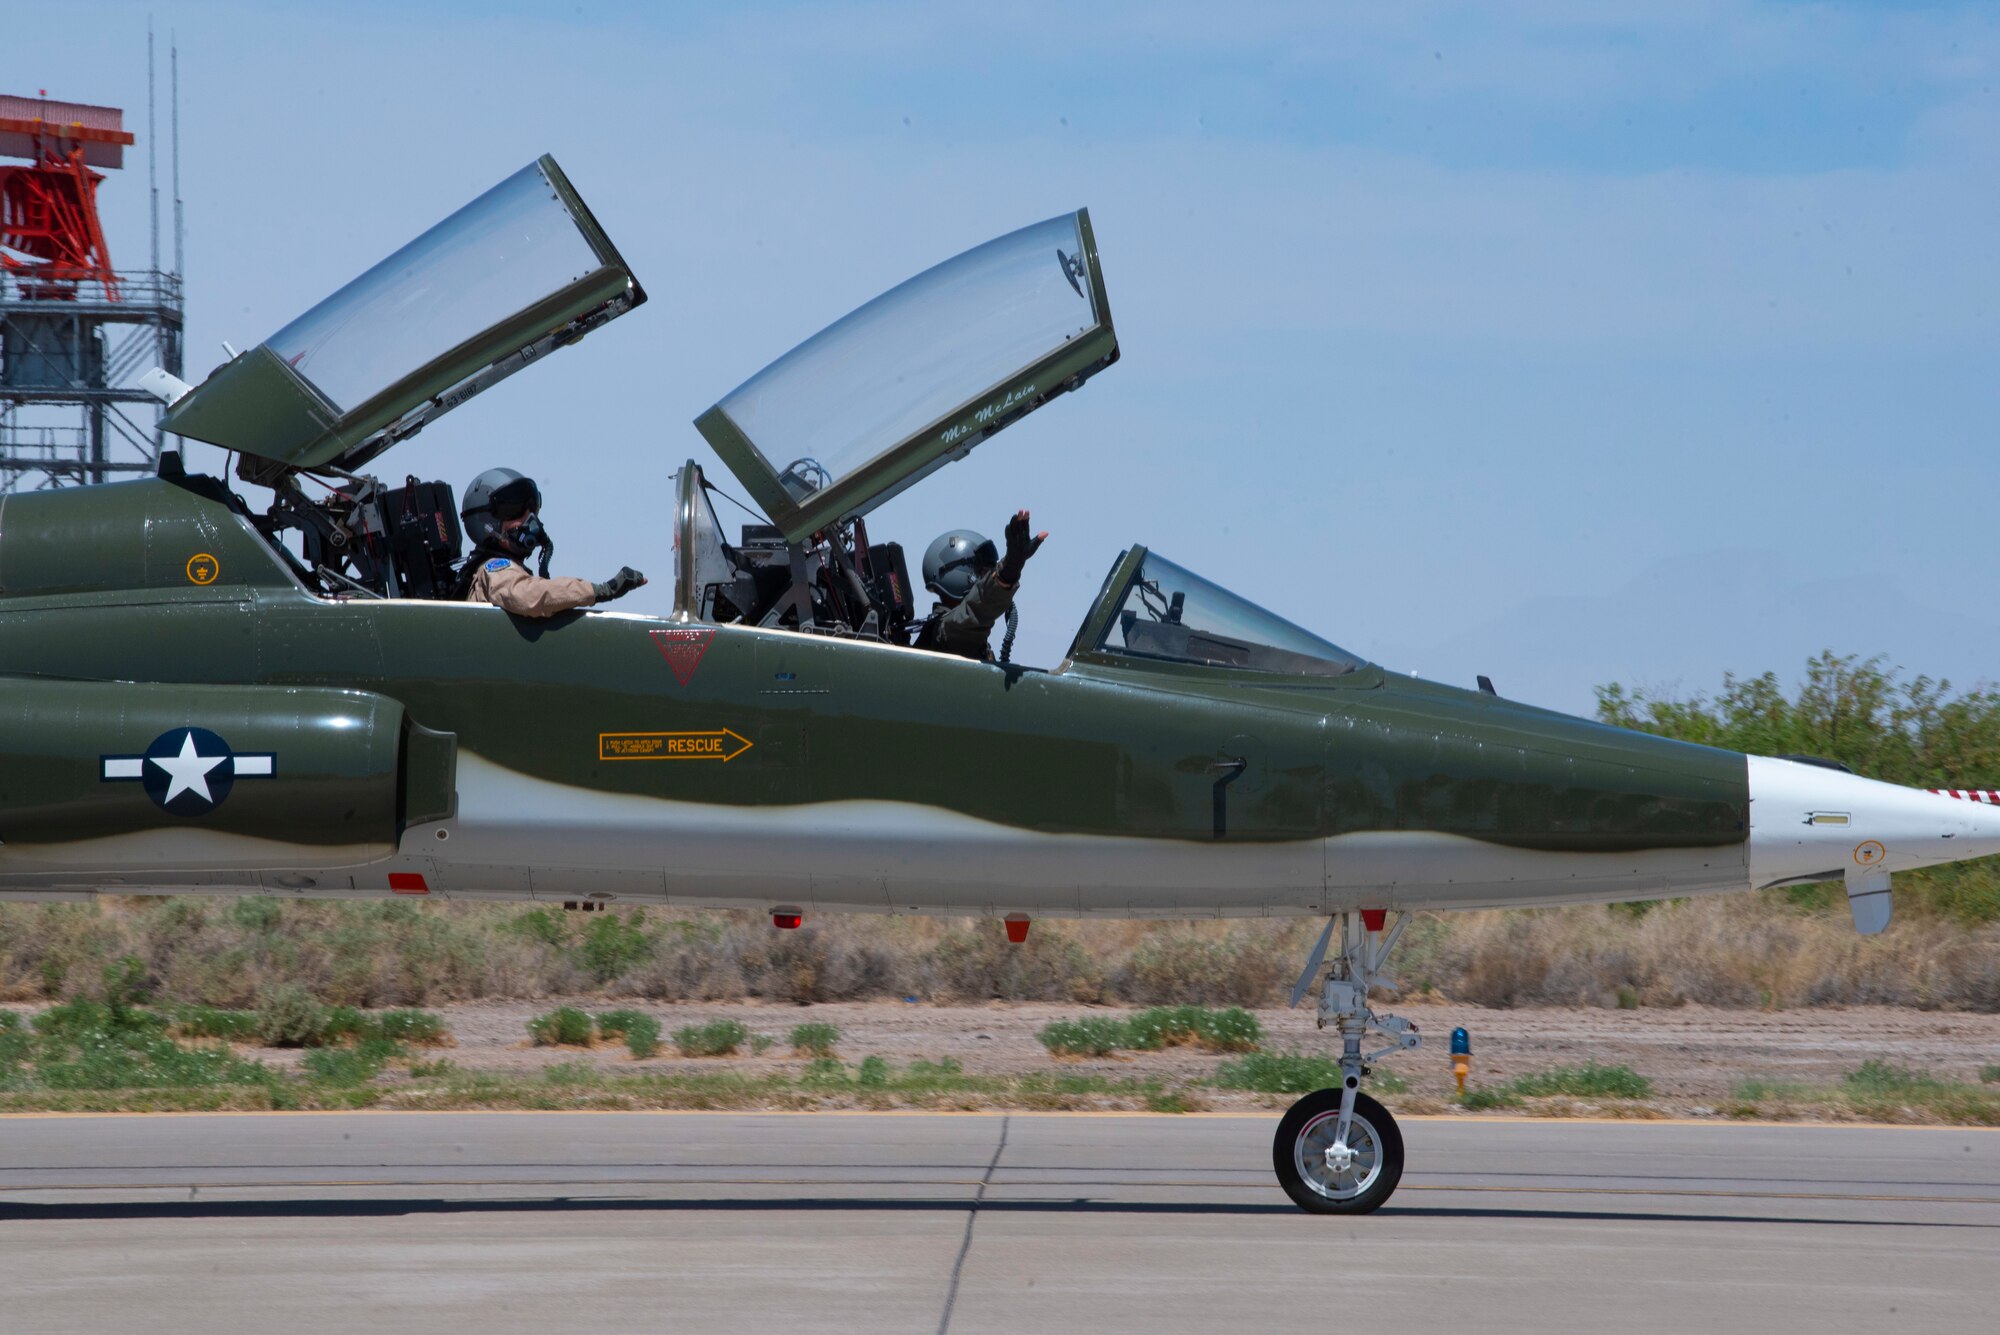 A T-38 Talon prepares to take off May 8, 2022, on Holloman Air Force Base, New Mexico. The T-38 was used in conjunction with the F-16 Viper during the 2022 Legacy of Liberty Air Show and Open House to show the capabilities of the F-16 in combat. (U.S. Air Force photo by Airman 1st Class Nicholas Paczkowski)